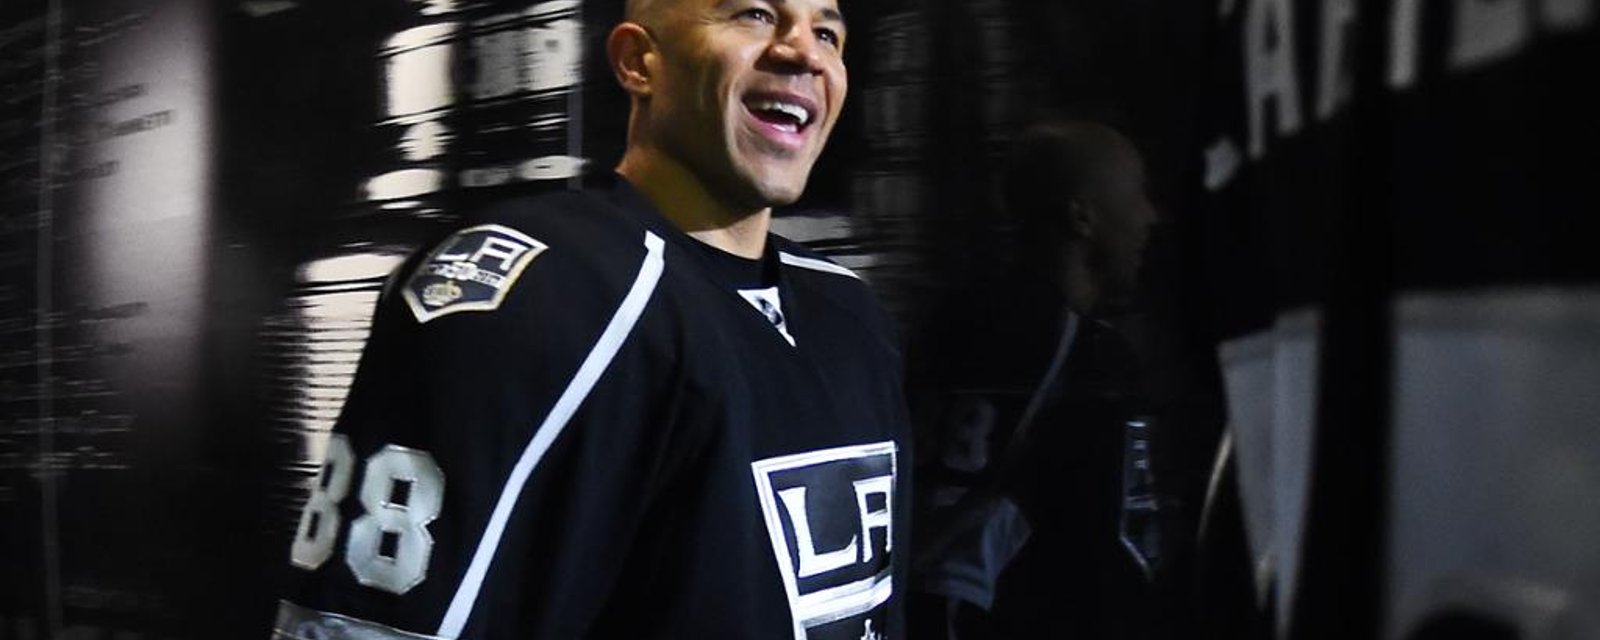 Iginla in race for coveted award! 